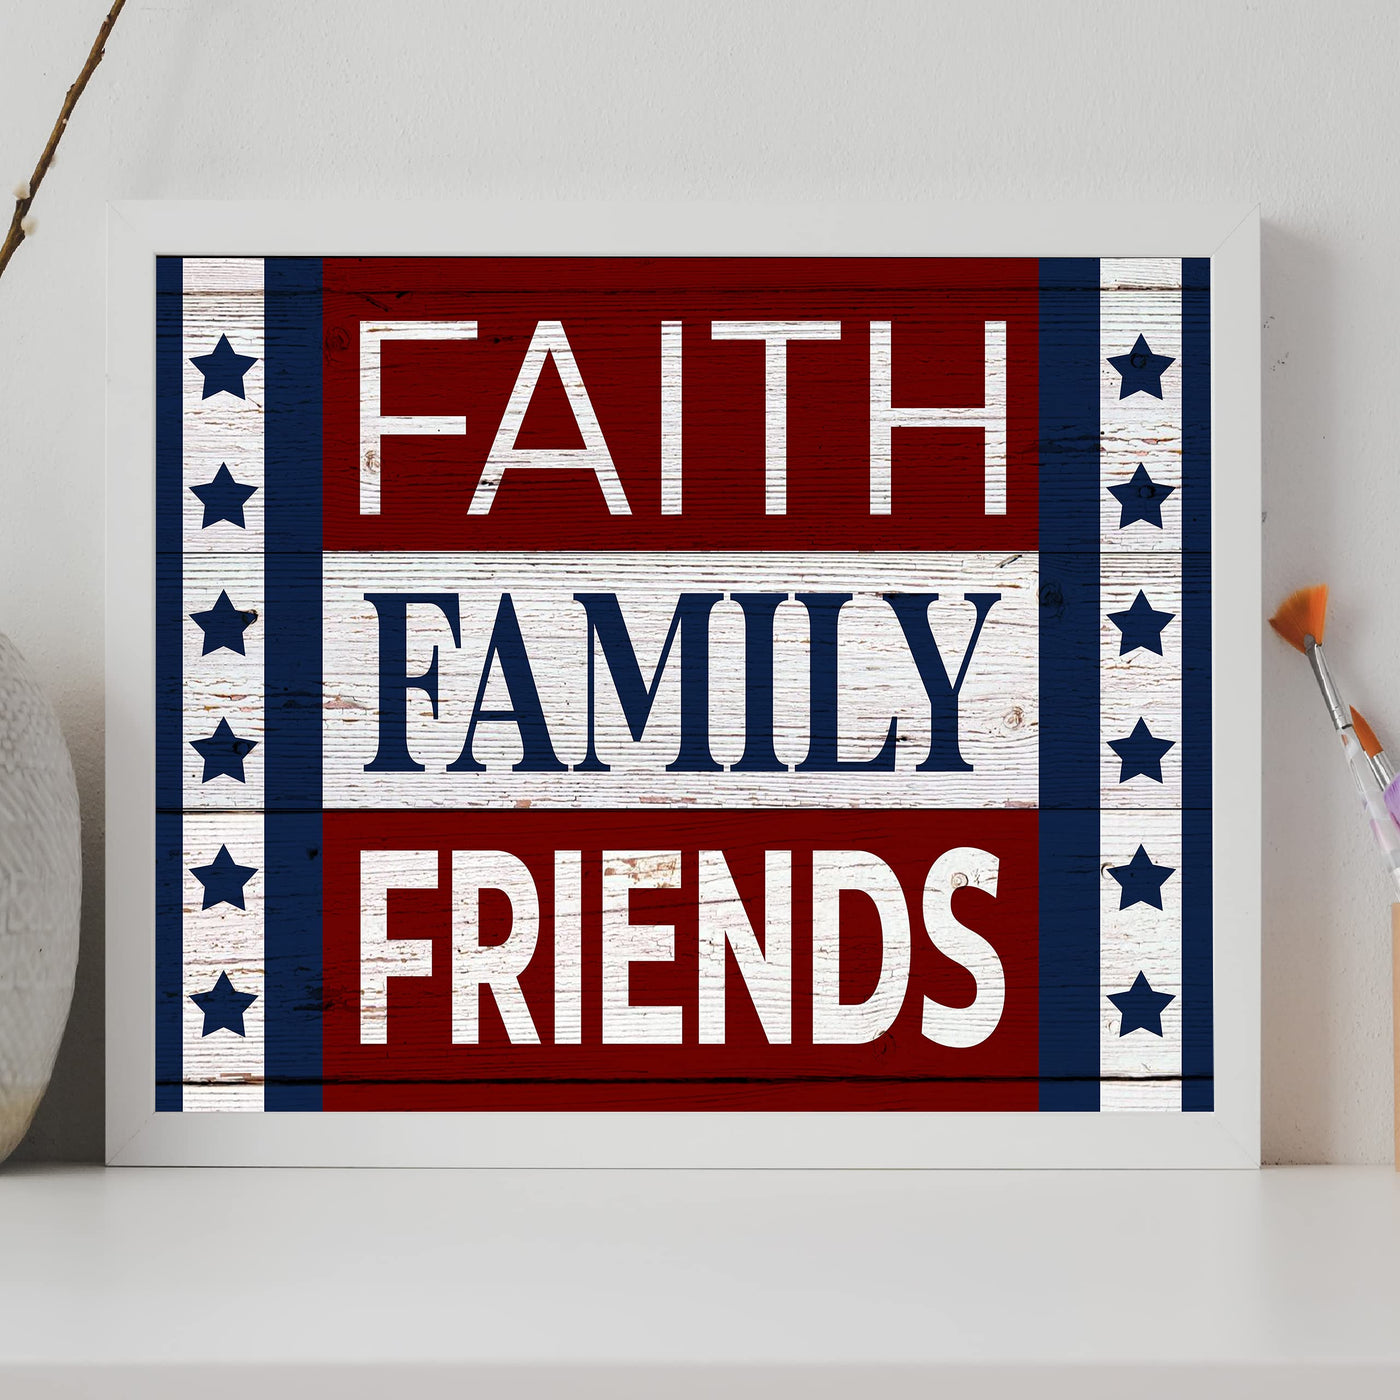 Faith-Family-Friends-Patriotic American Flag Print-14x11" Motivational Farmhouse Poster Print-Ready to Frame. Inspirational Home-Office-Christian-Welcome Decor. Great Gift! Printed on Photo Paper.